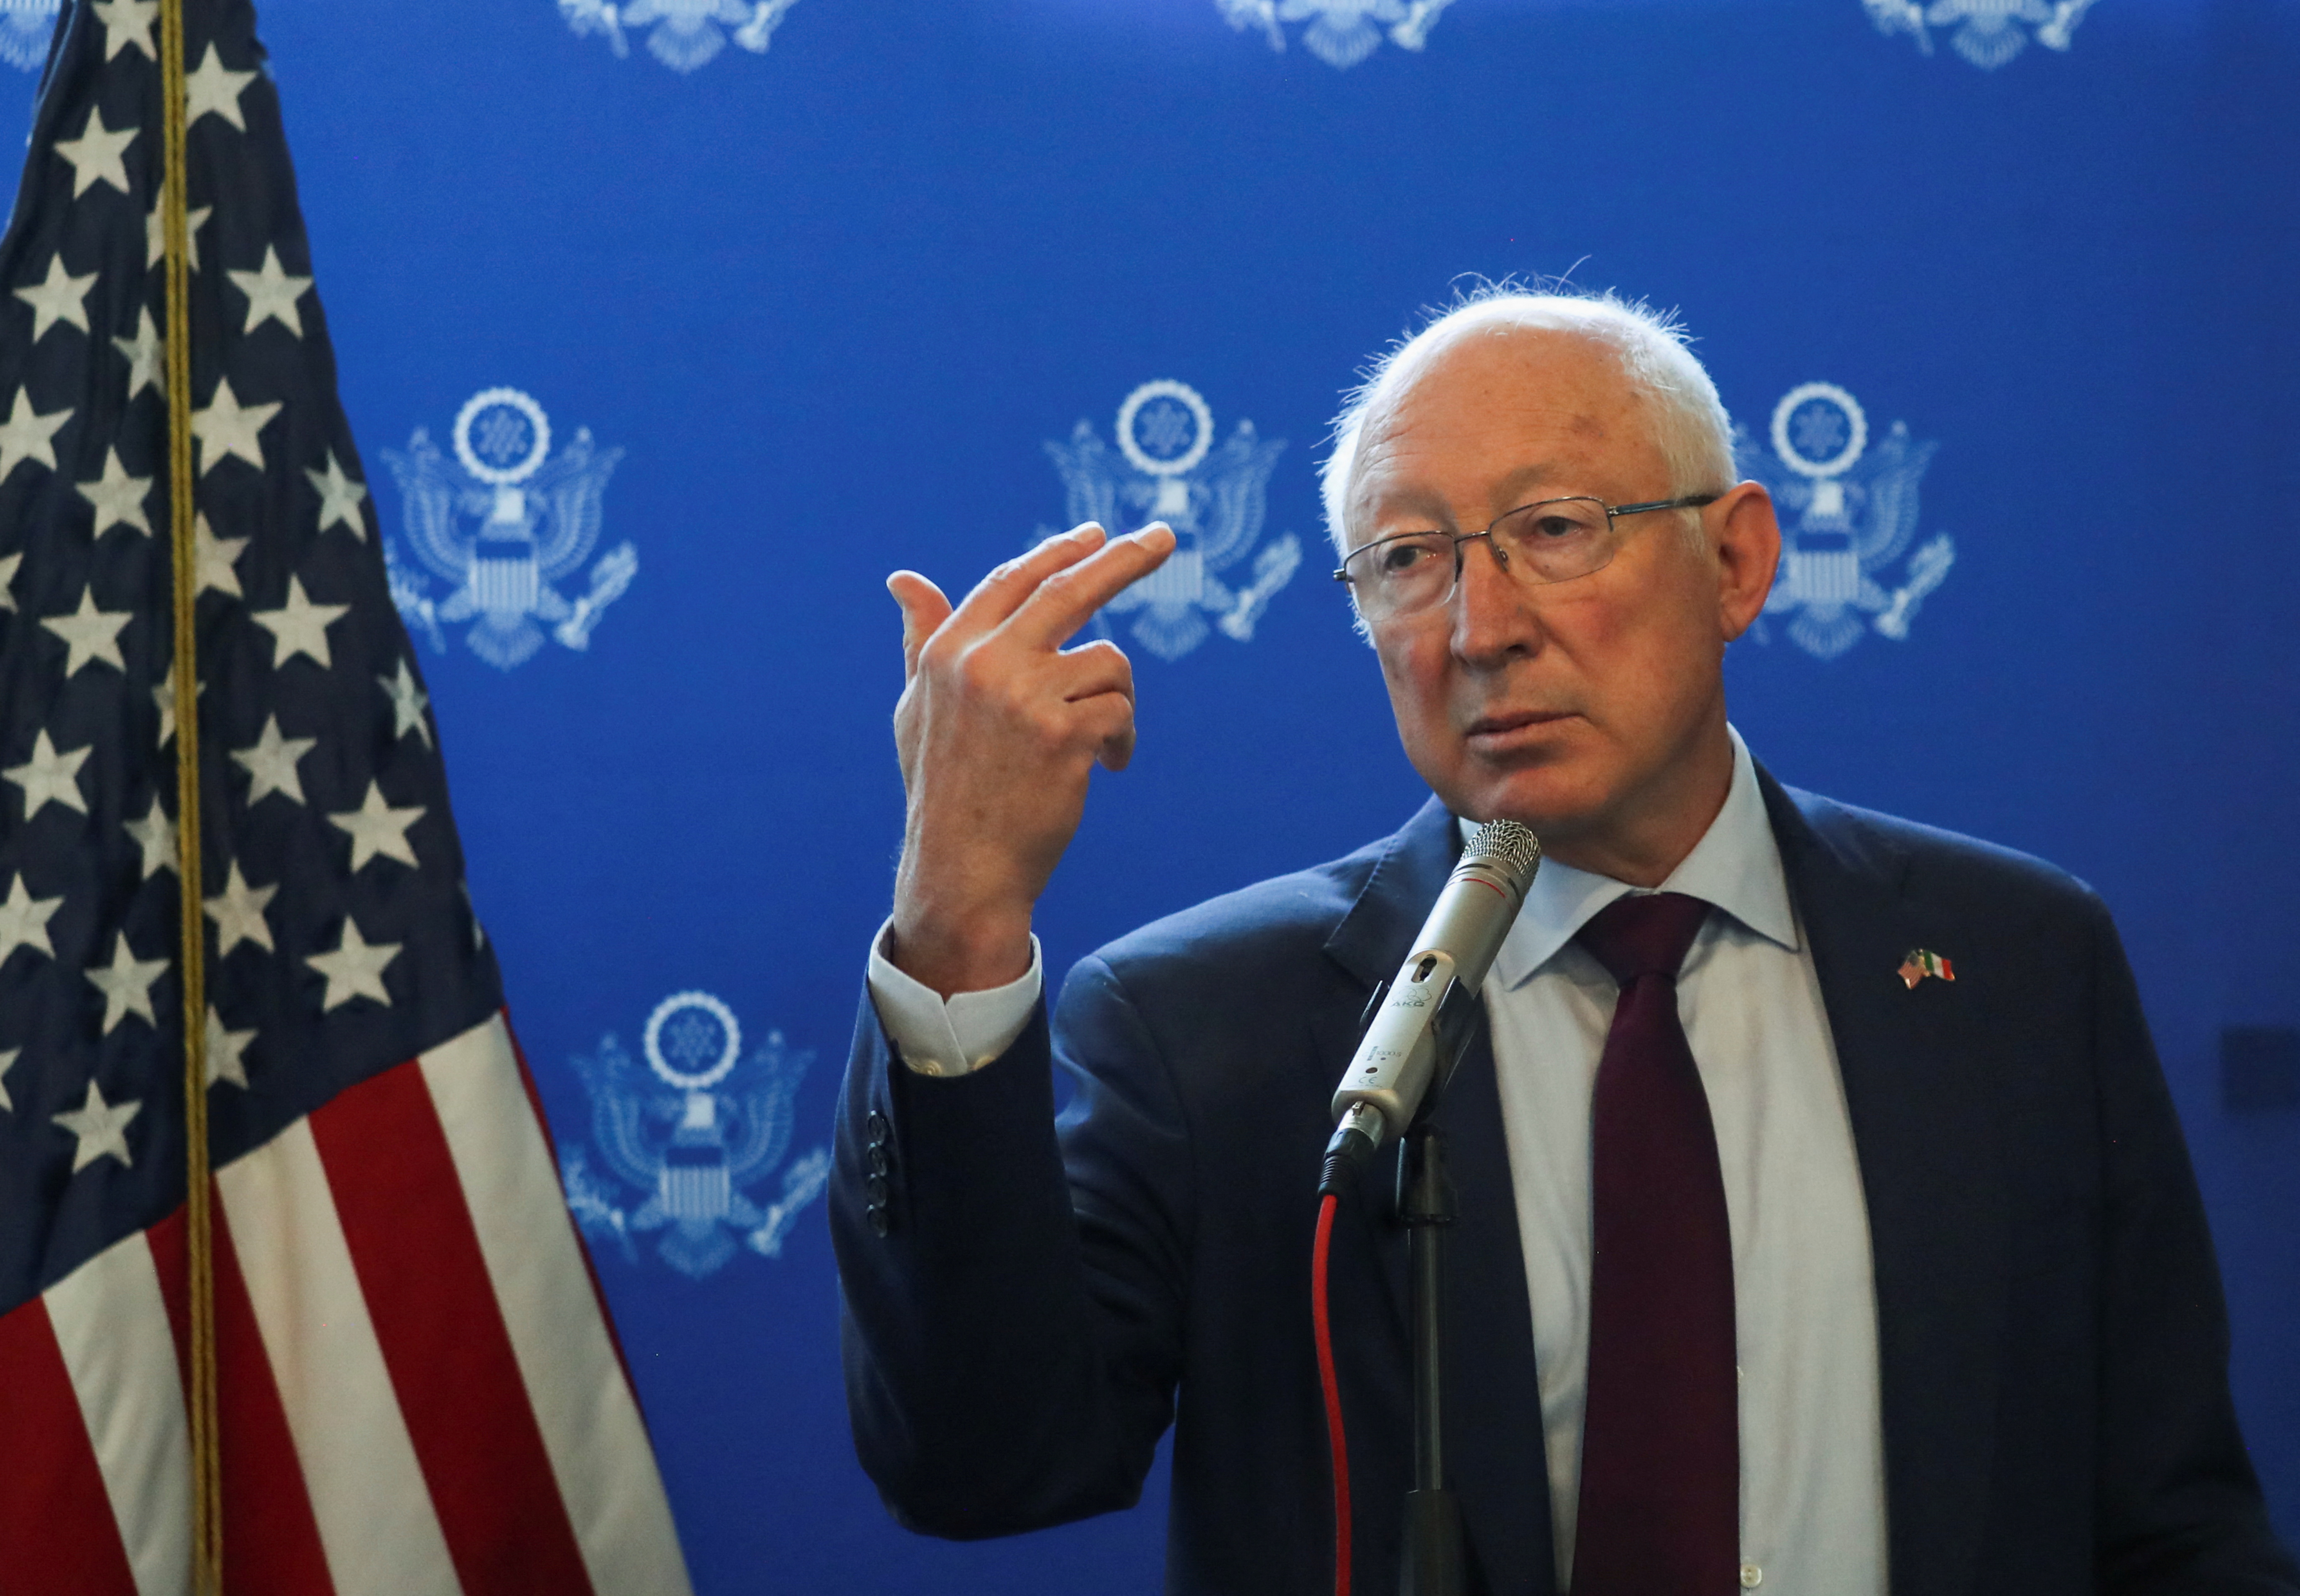 U.S. ambassador to Mexico Ken Salazar holds a news conference at his residence in Mexico City, Mexico March 10, 2023. REUTERS/Raquel Cunha